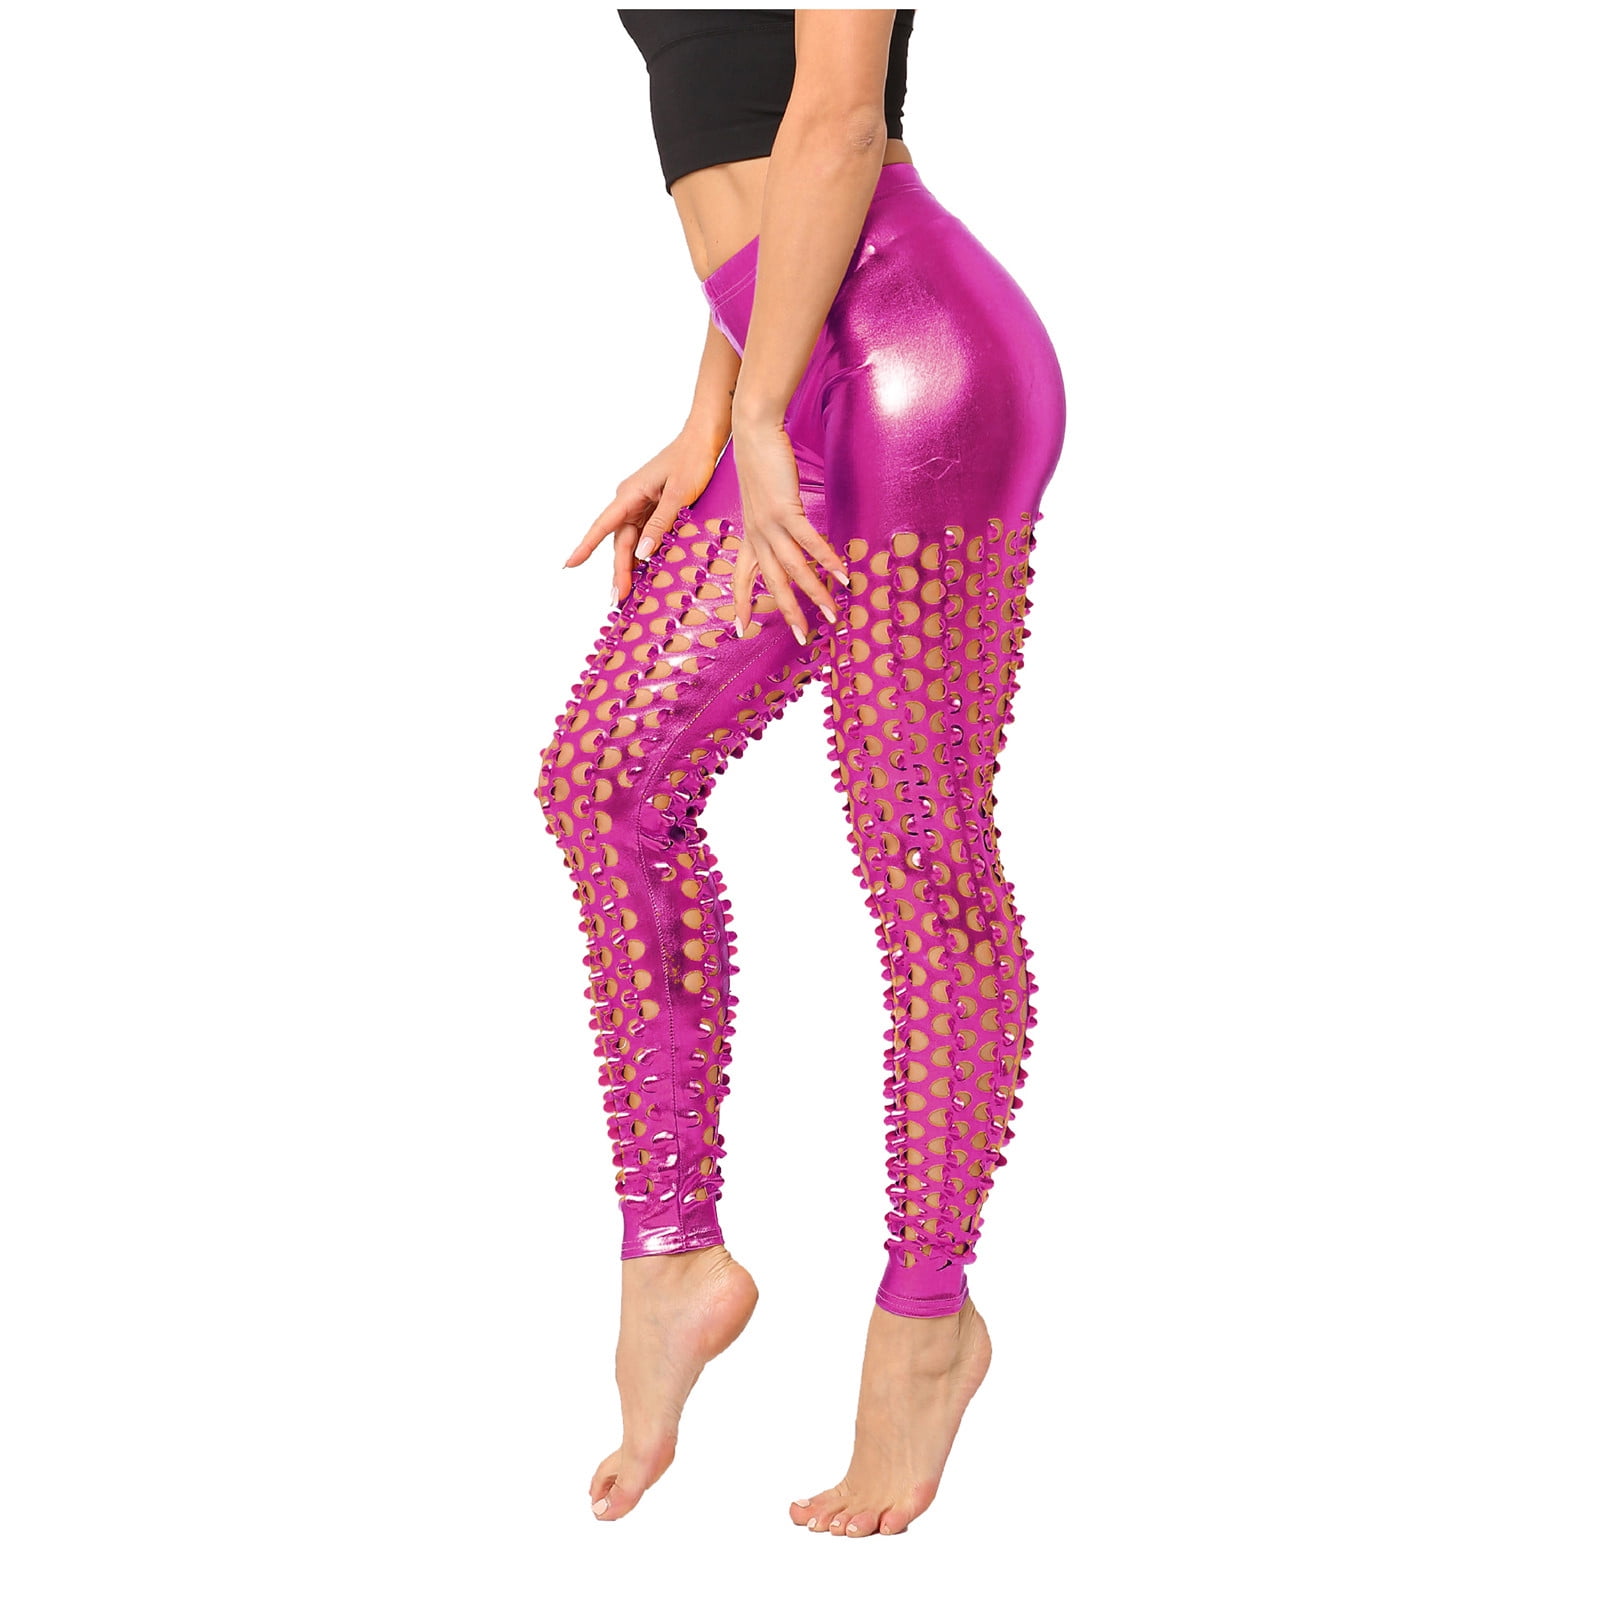 Slinky Aphrodite Leggings Pants. Form Fitting With Scrunch-butt & Camel Toe.  These Low Riders Are Made With Soft Stretchy Slinky Fabric. -  Finland